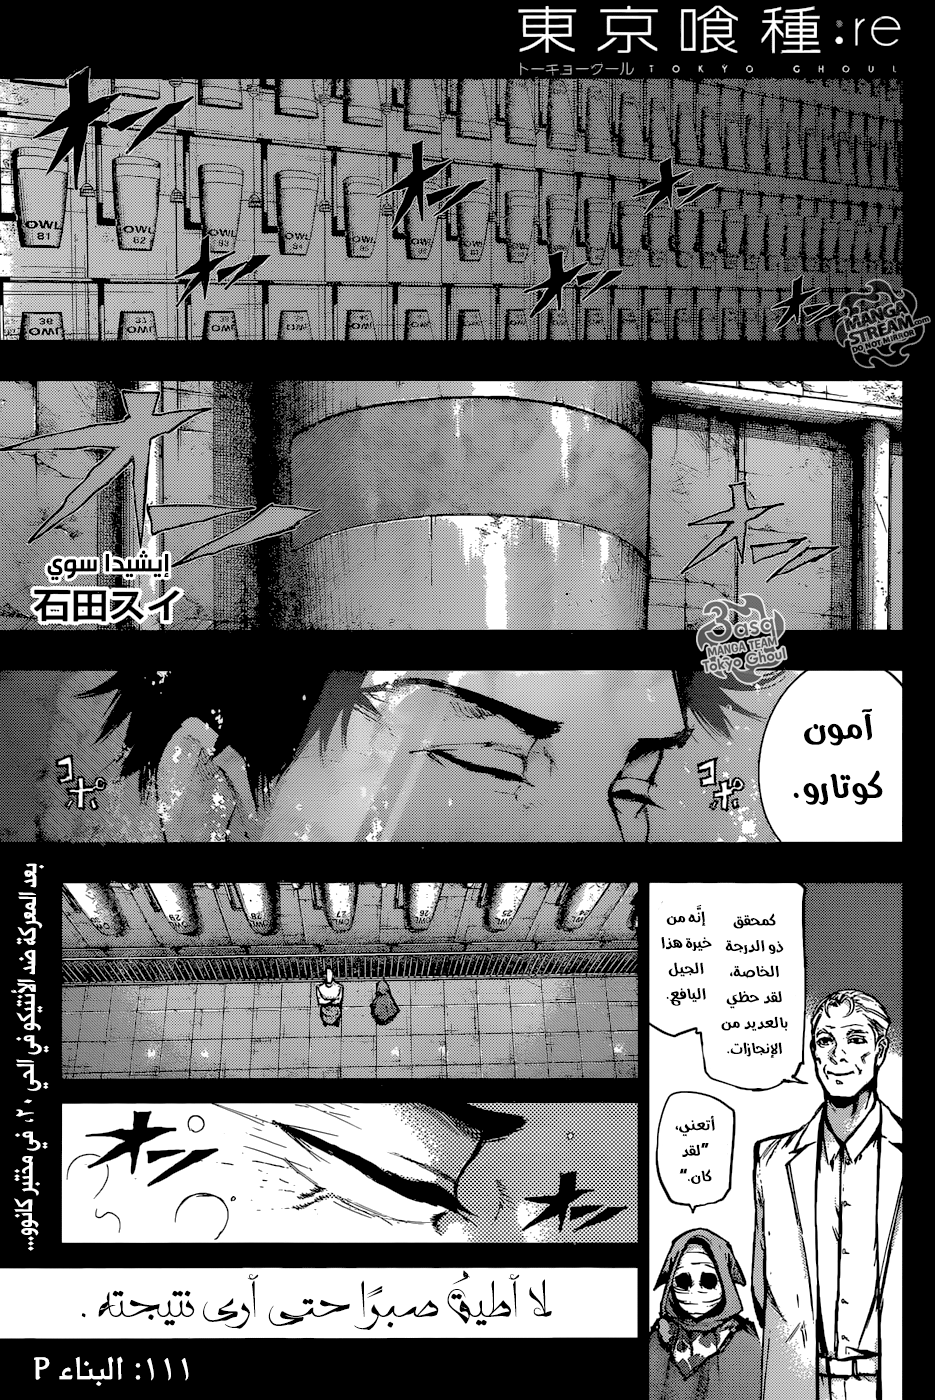 Tokyo Ghoul: Re: Chapter 111 - Page 1